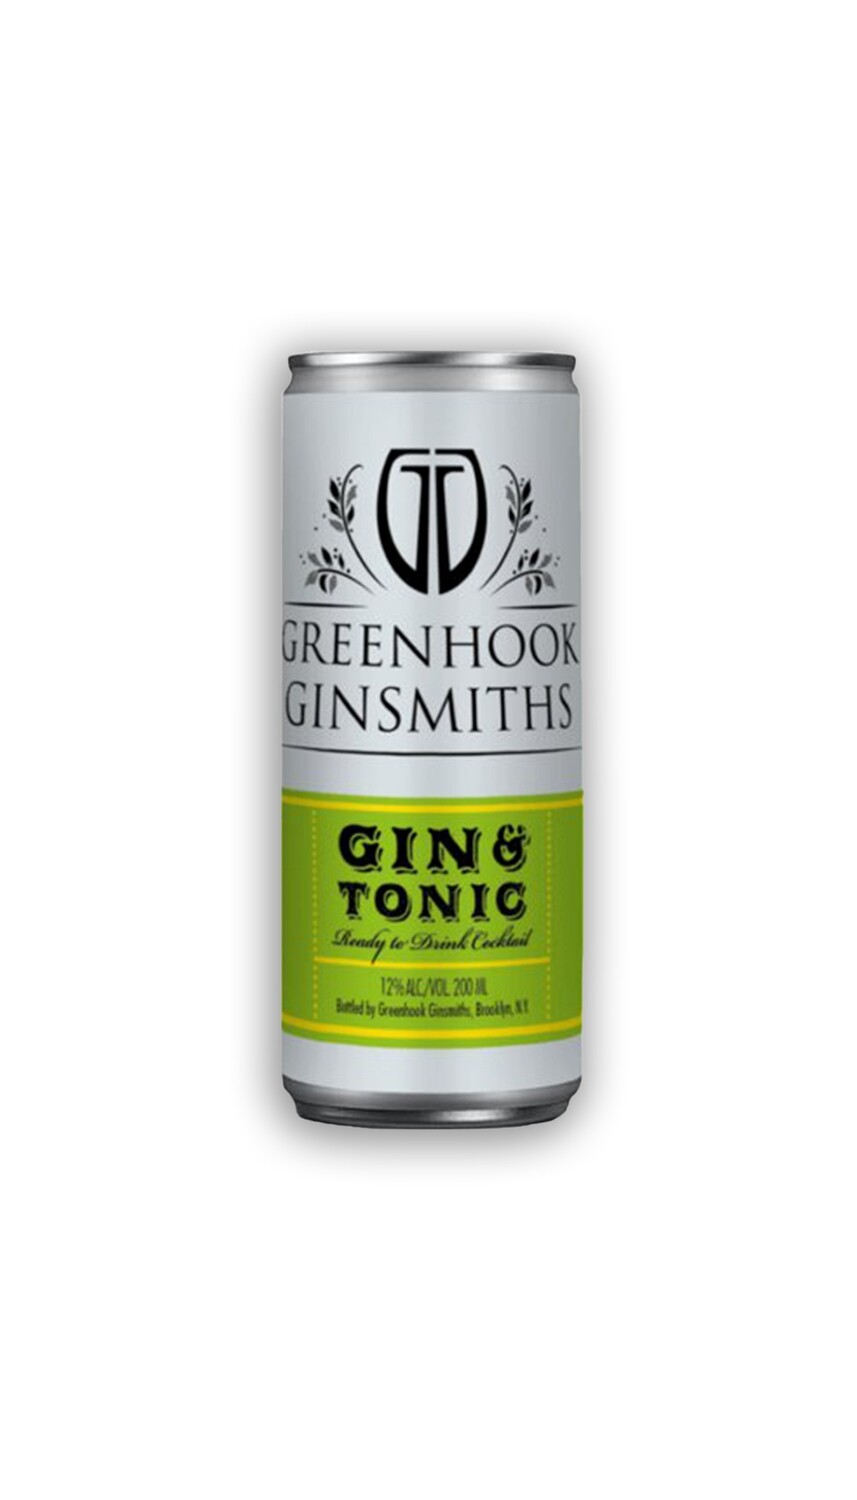 Greenhook Ginsmiths  can gin & tonic